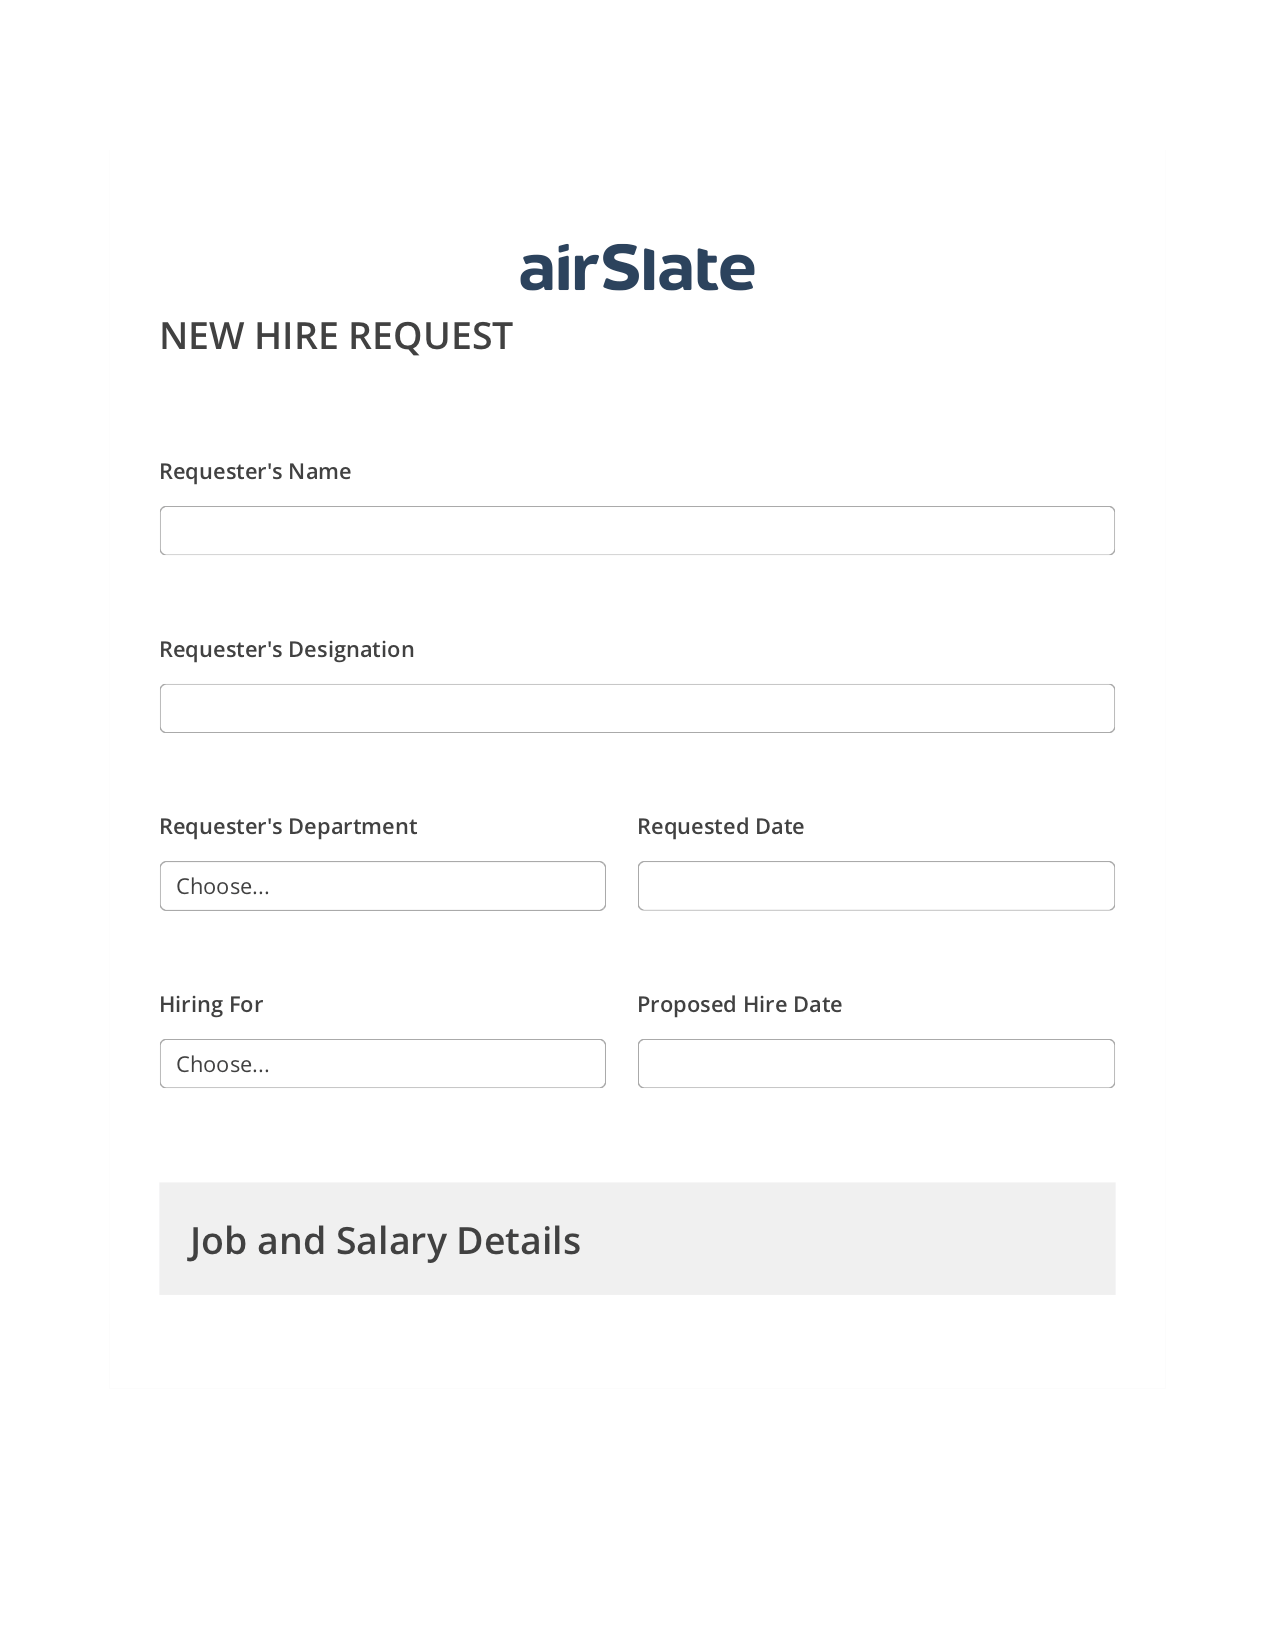 Hiring Request Workflow Pre-fill Dropdowns from Smartsheet Bot, Unassign Role Bot, Export to Excel 365 Bot